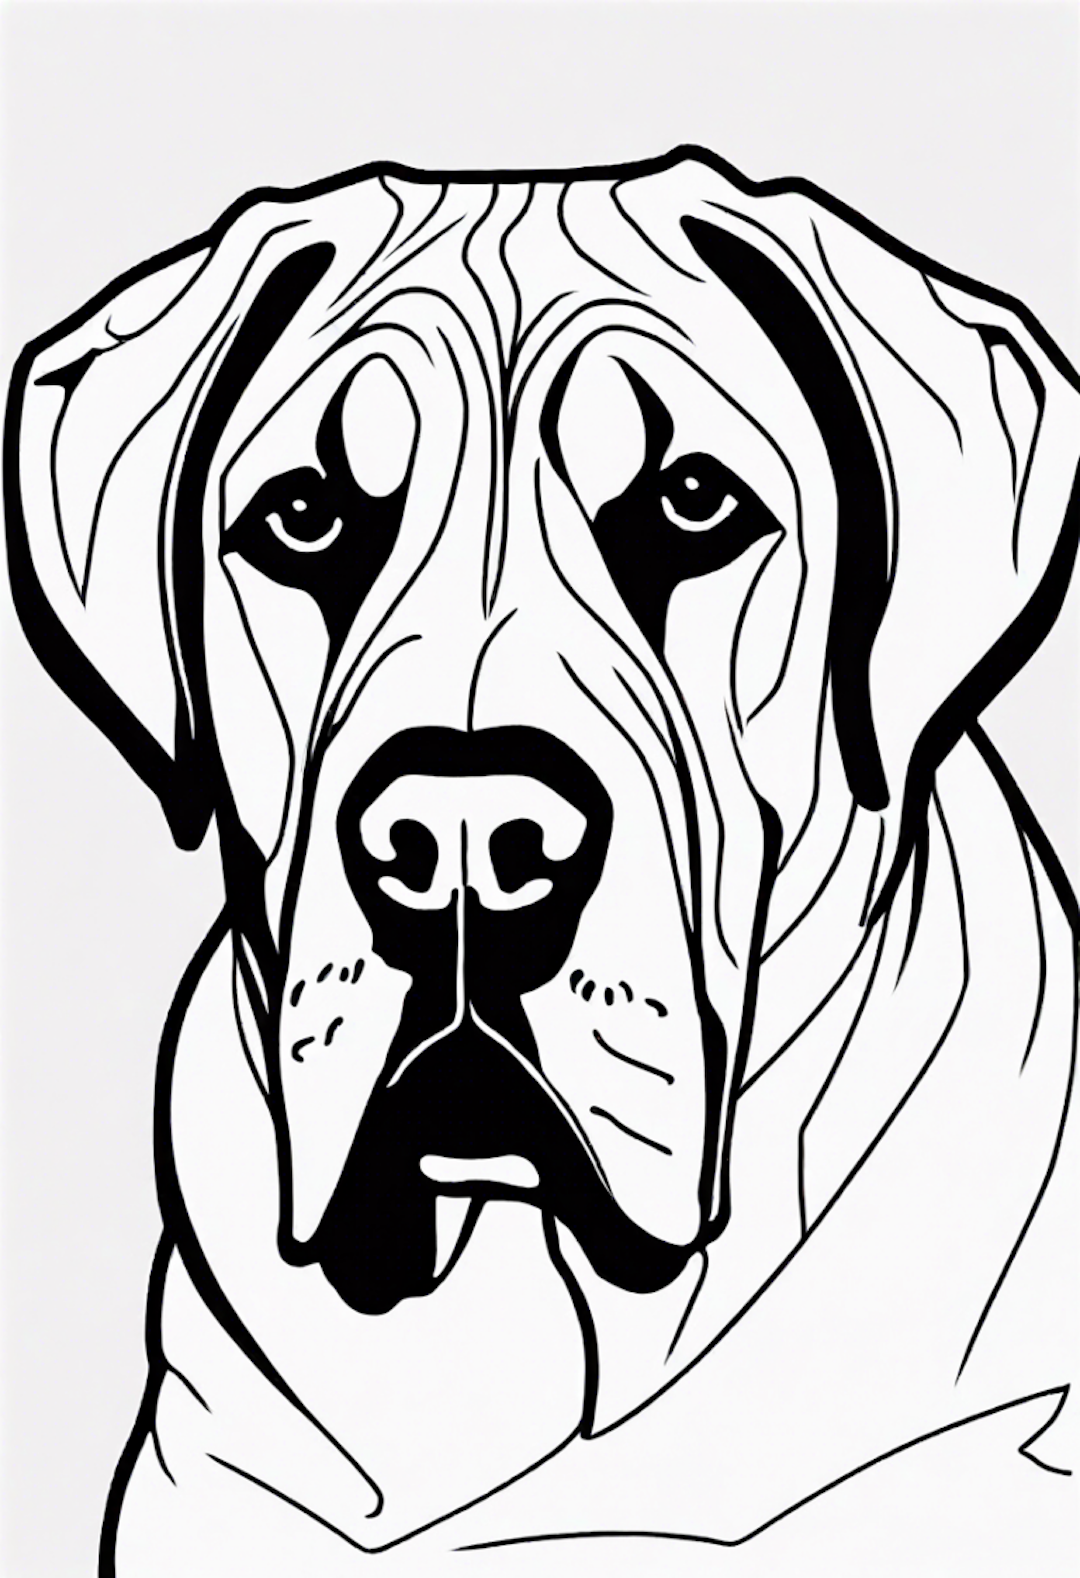 Gentle Giant: A Mastiff Coloring Page coloring pages